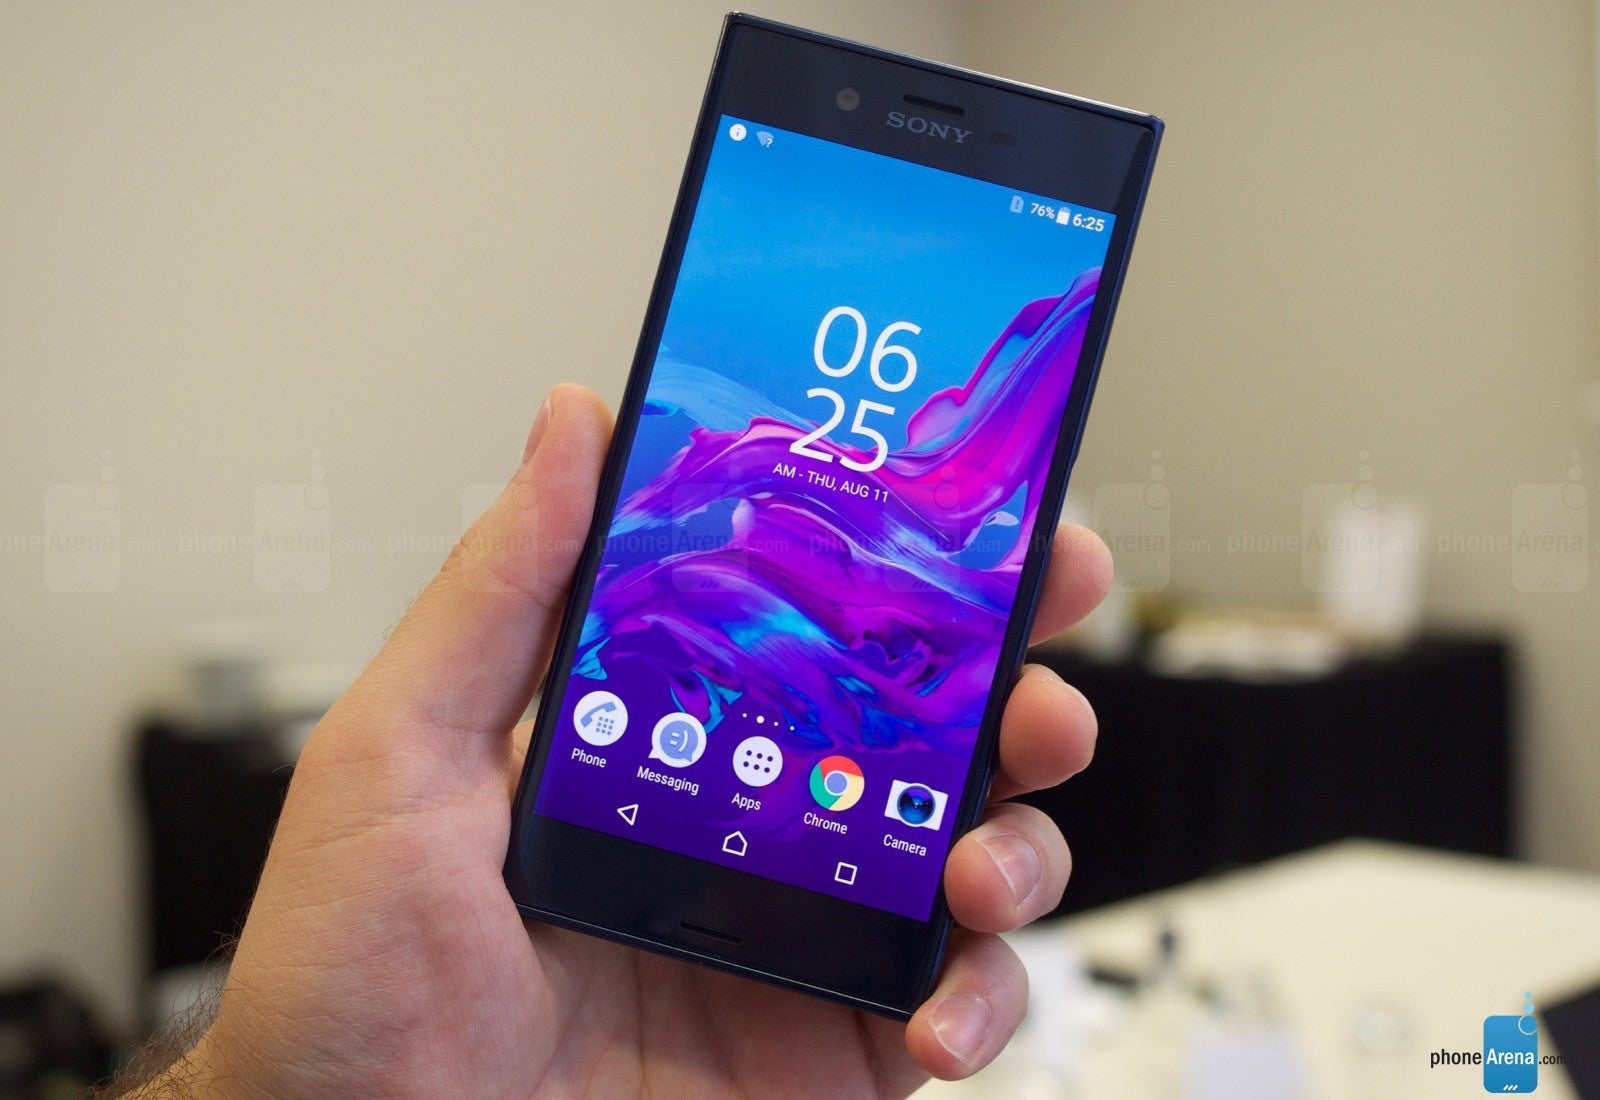 Sony Xperia XZ, X Performance receive new update, here's what's new